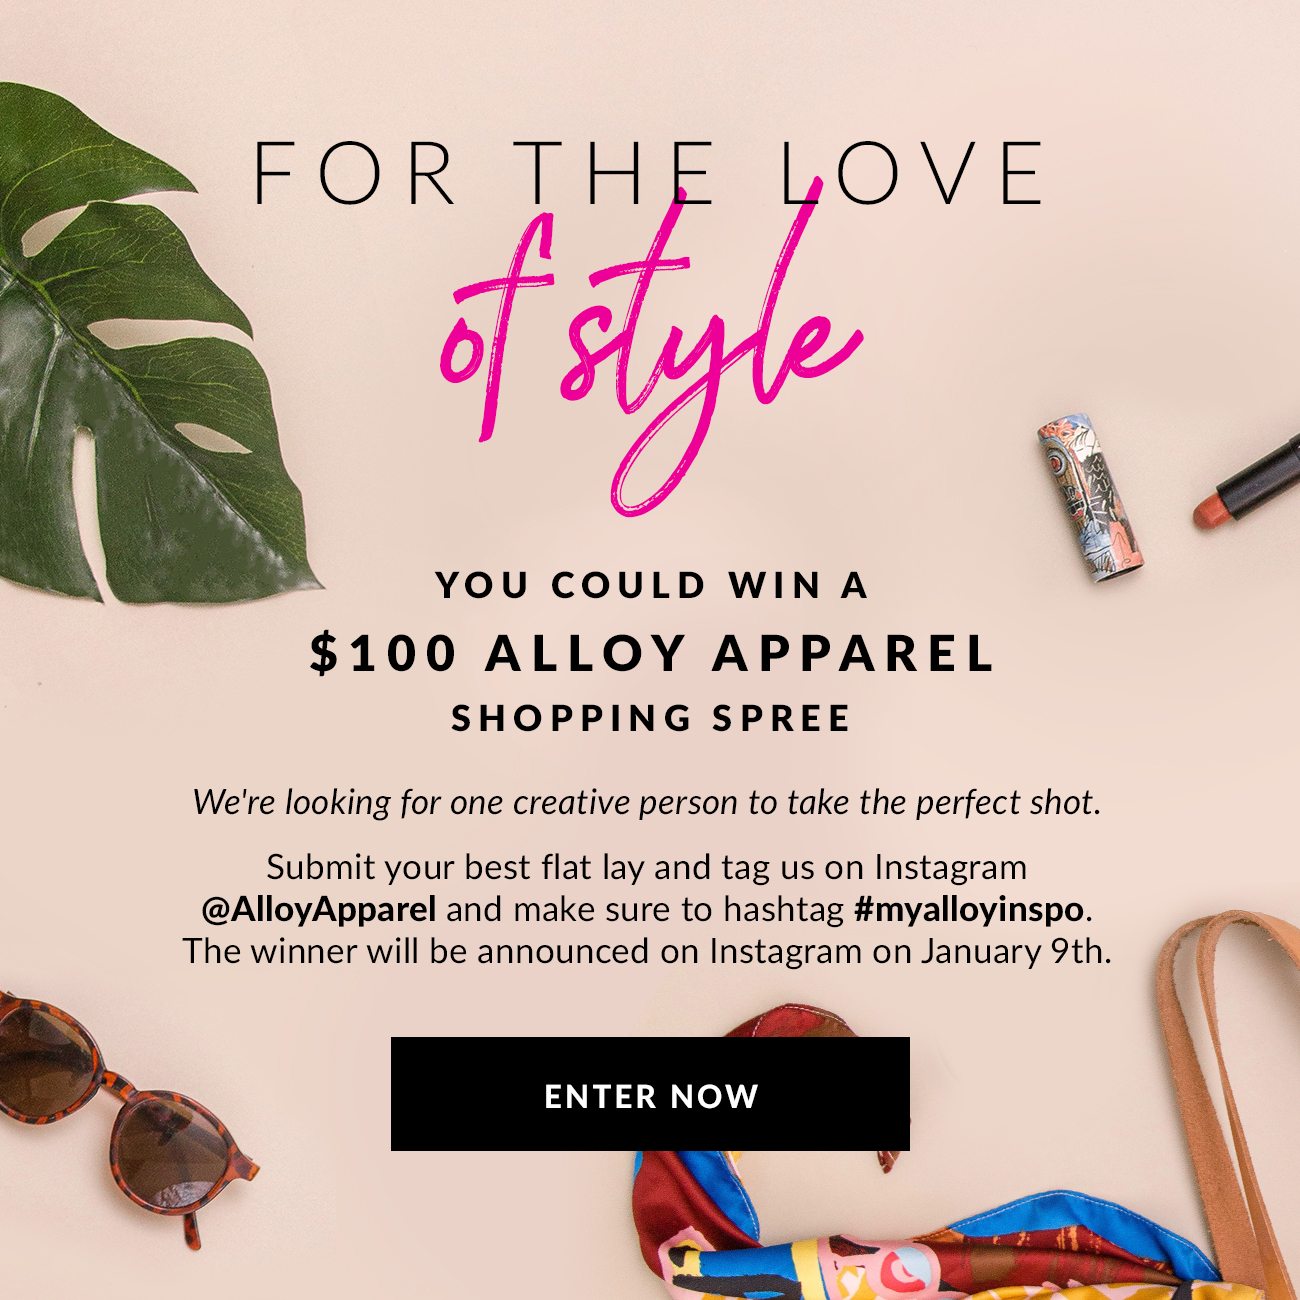 For the Love of Style - Win $100 Alloy Apparel Shopping Spree - Enter Now